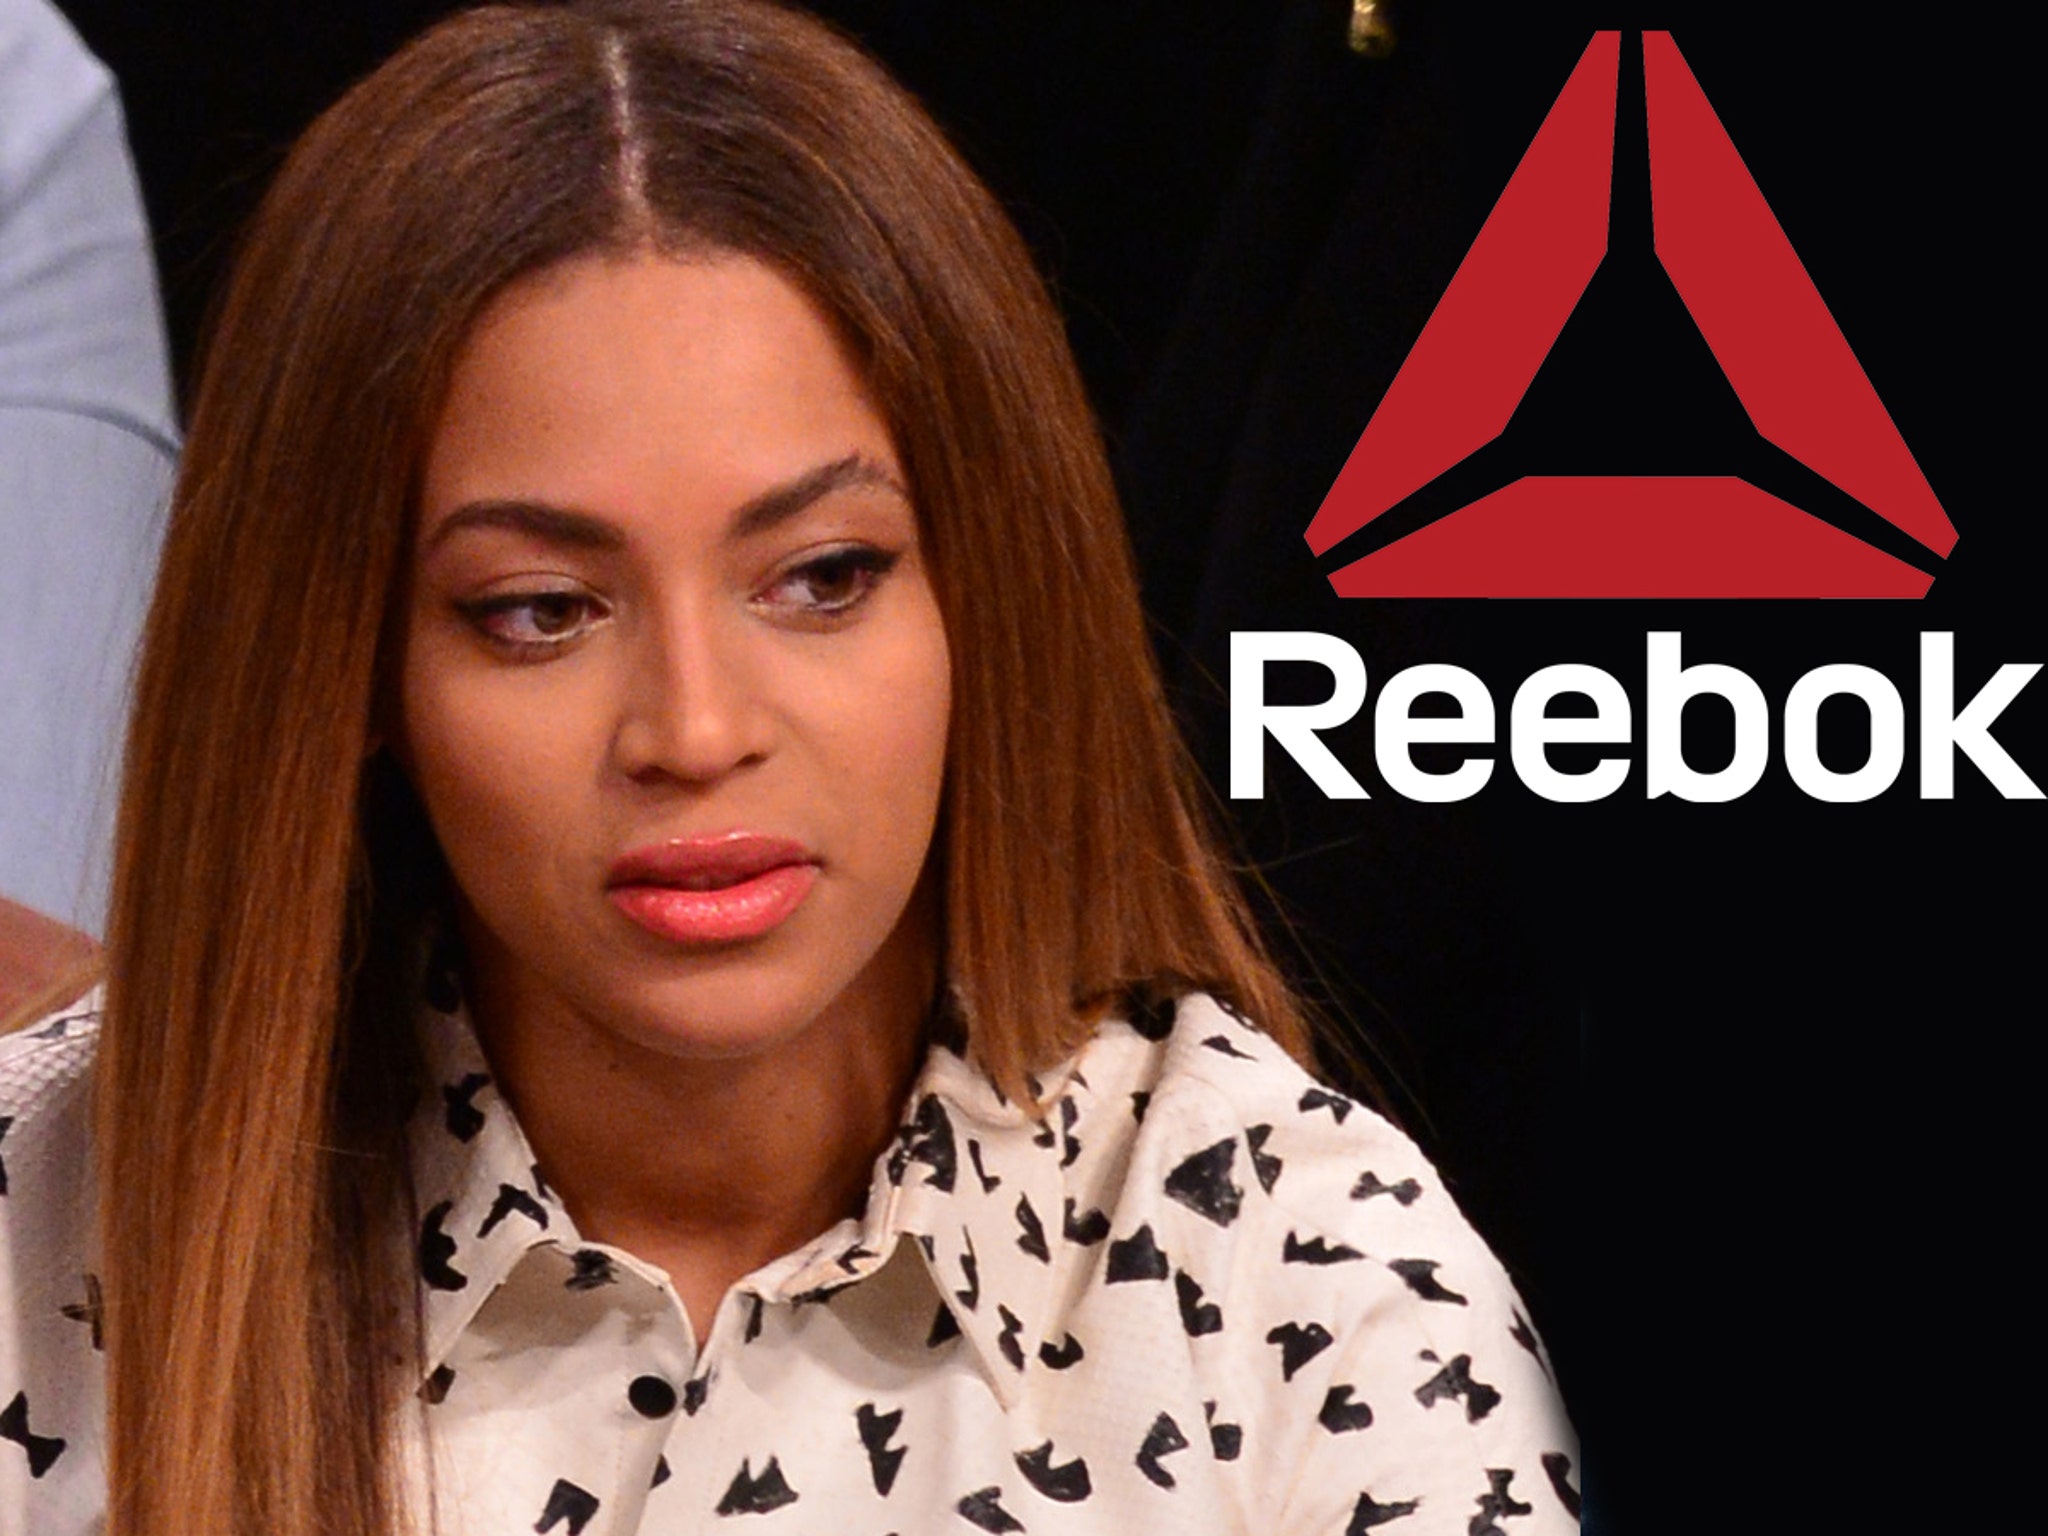 Dempsey Uforenelig kolbøtte Beyonce Never Walked Out of Meeting with Reebok, Company Says